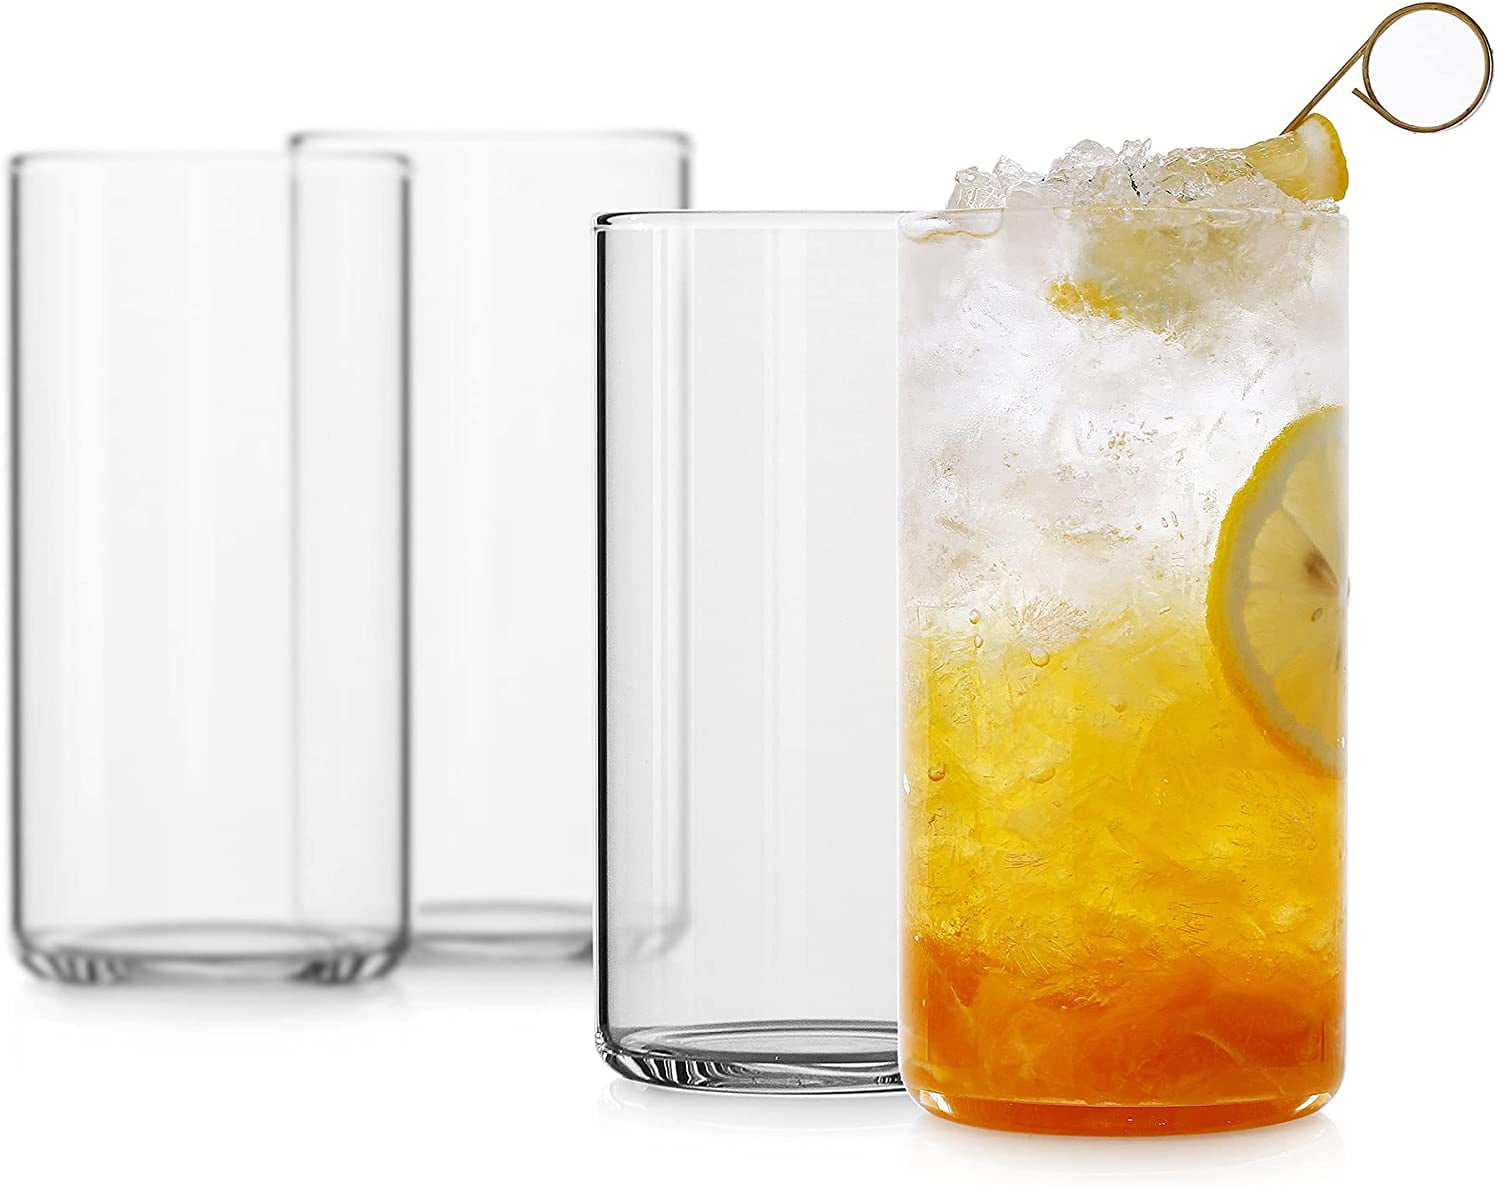 Luxu Drinking Glasses 19 Oz Thin Highball Glasses Set Of 4 Clear Tall Glass Cups For Water